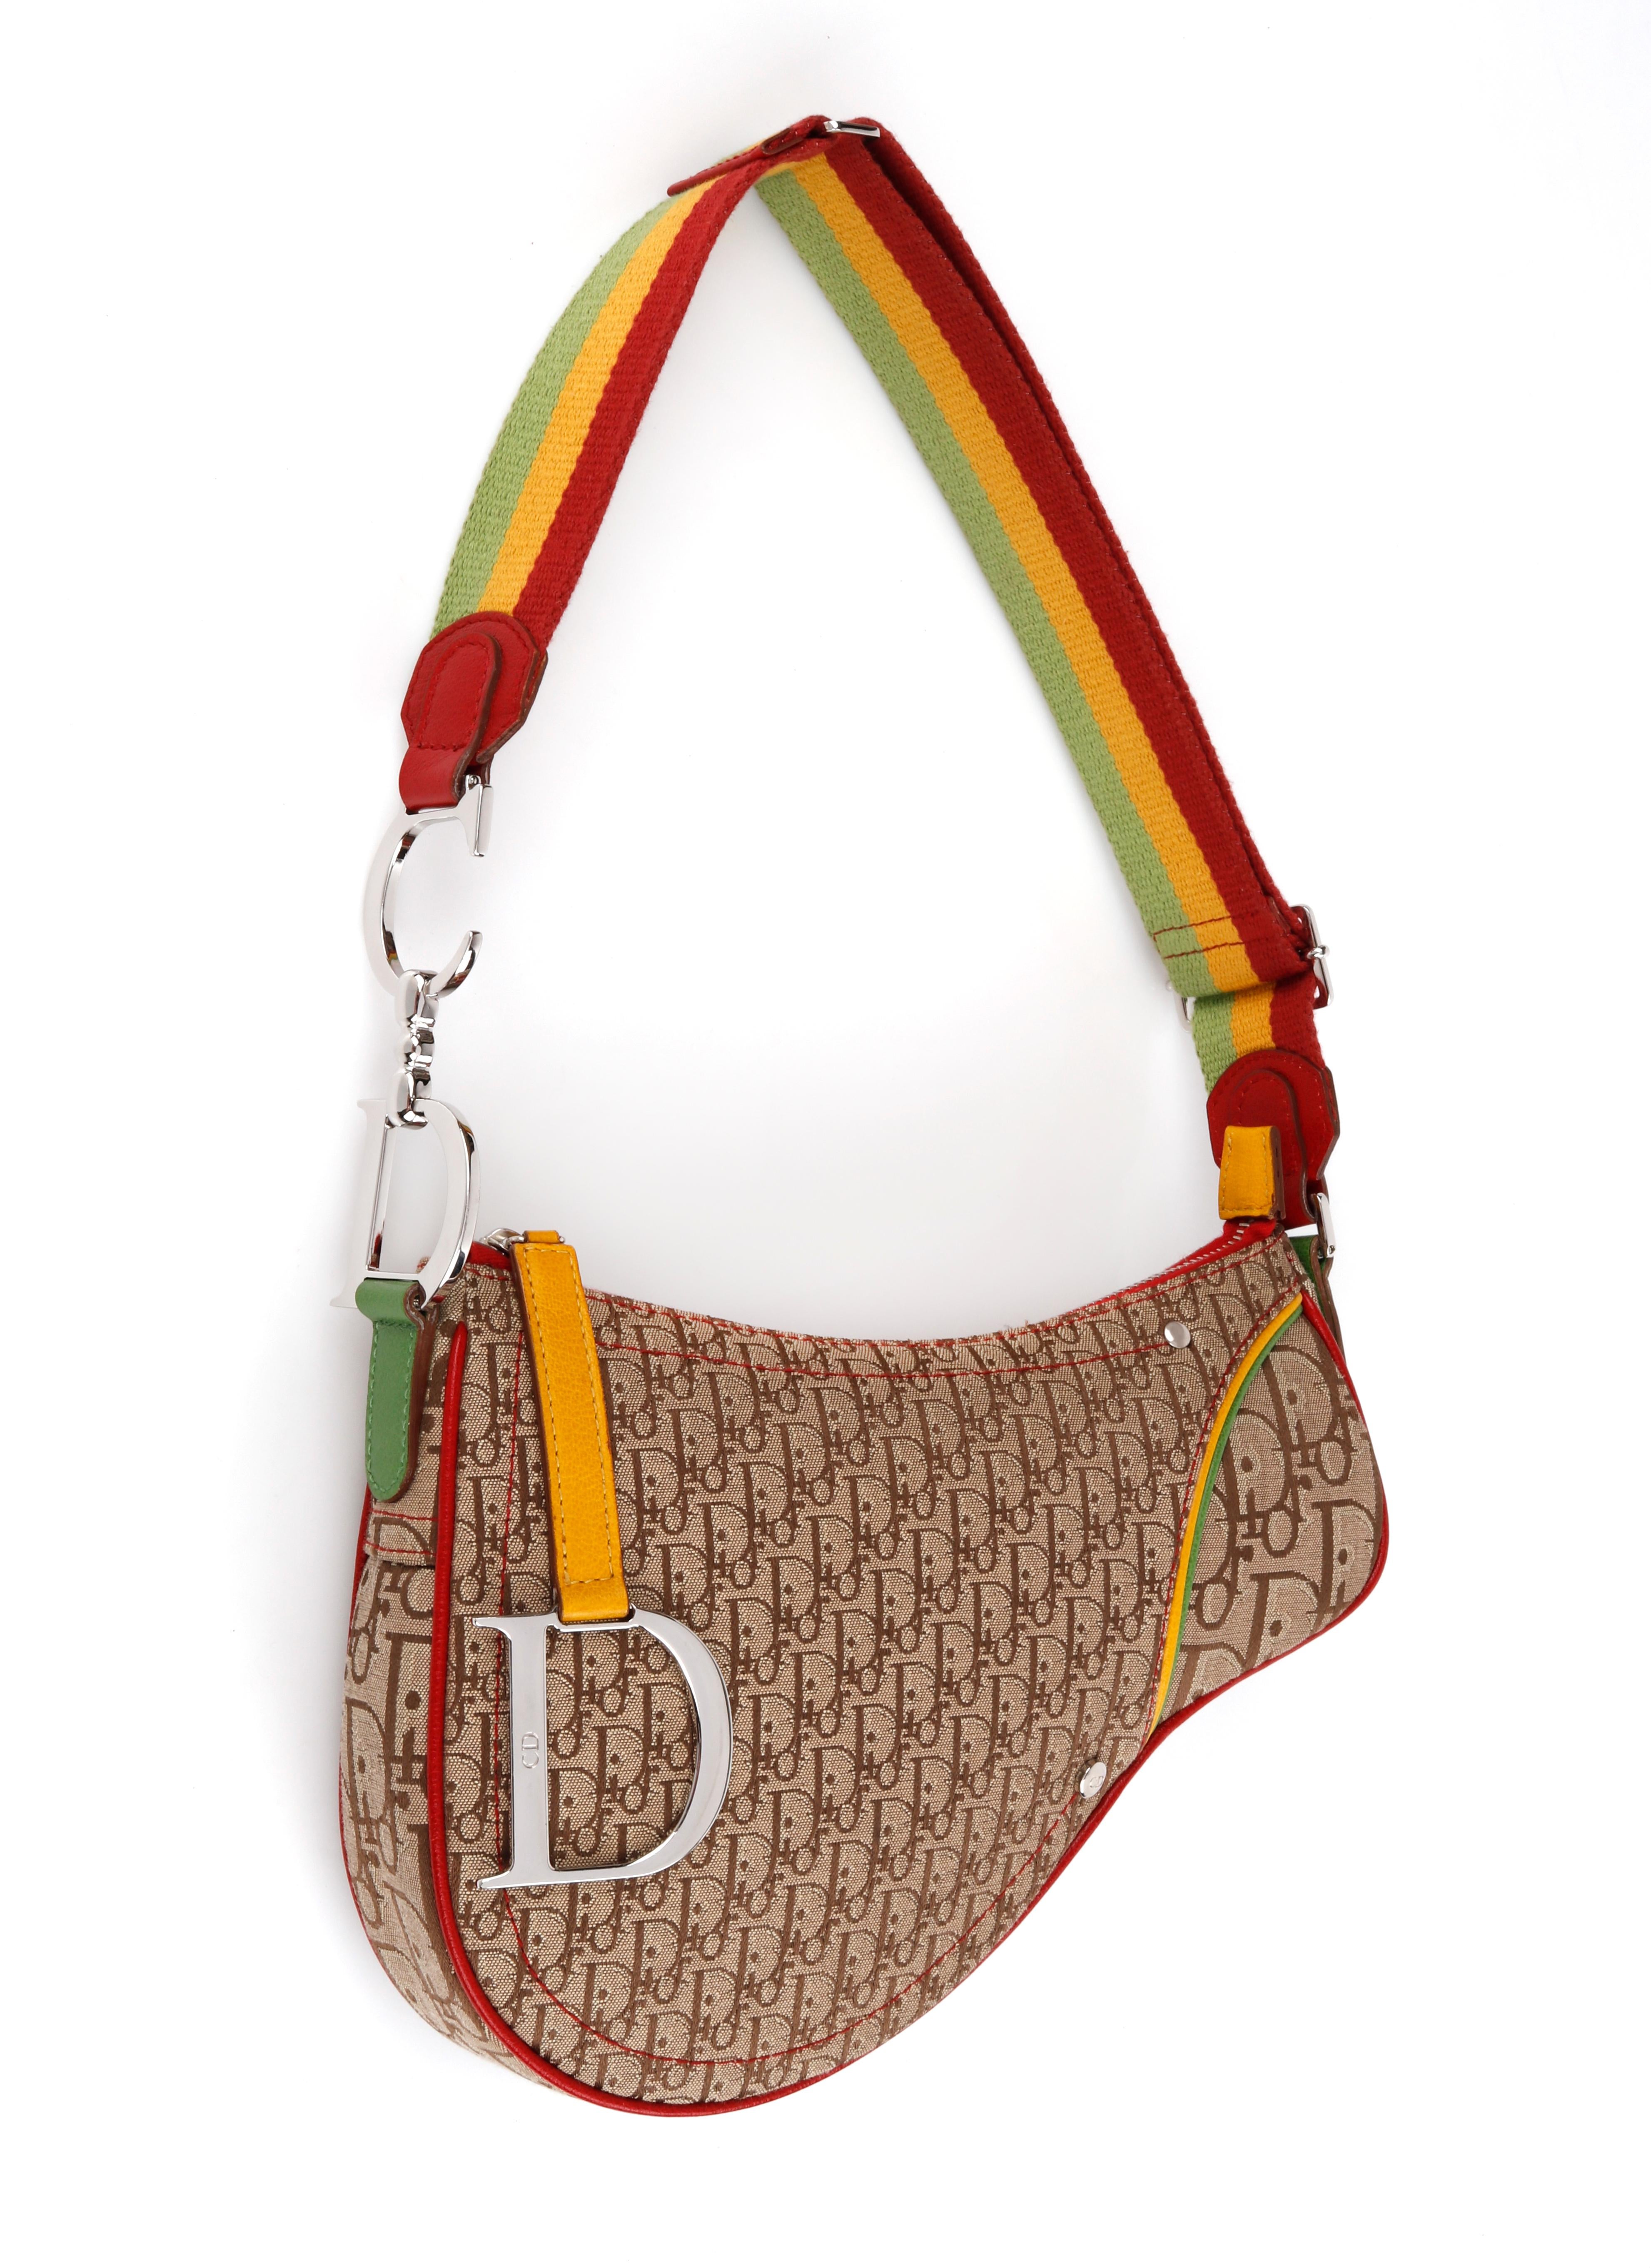 CHRISTIAN DIOR c. 2004 “Rasta” Brown Diorissimo Saddle Shoulder Bag 

Brand / Manufacturer: Christian Dior
Manufacturer Style Name: Saddle Bag
Style: Shoulder Bag  
Color(s): Shades of brown, tan, red, yellow and green. 
Lined: Yes
Unmarked Fabric